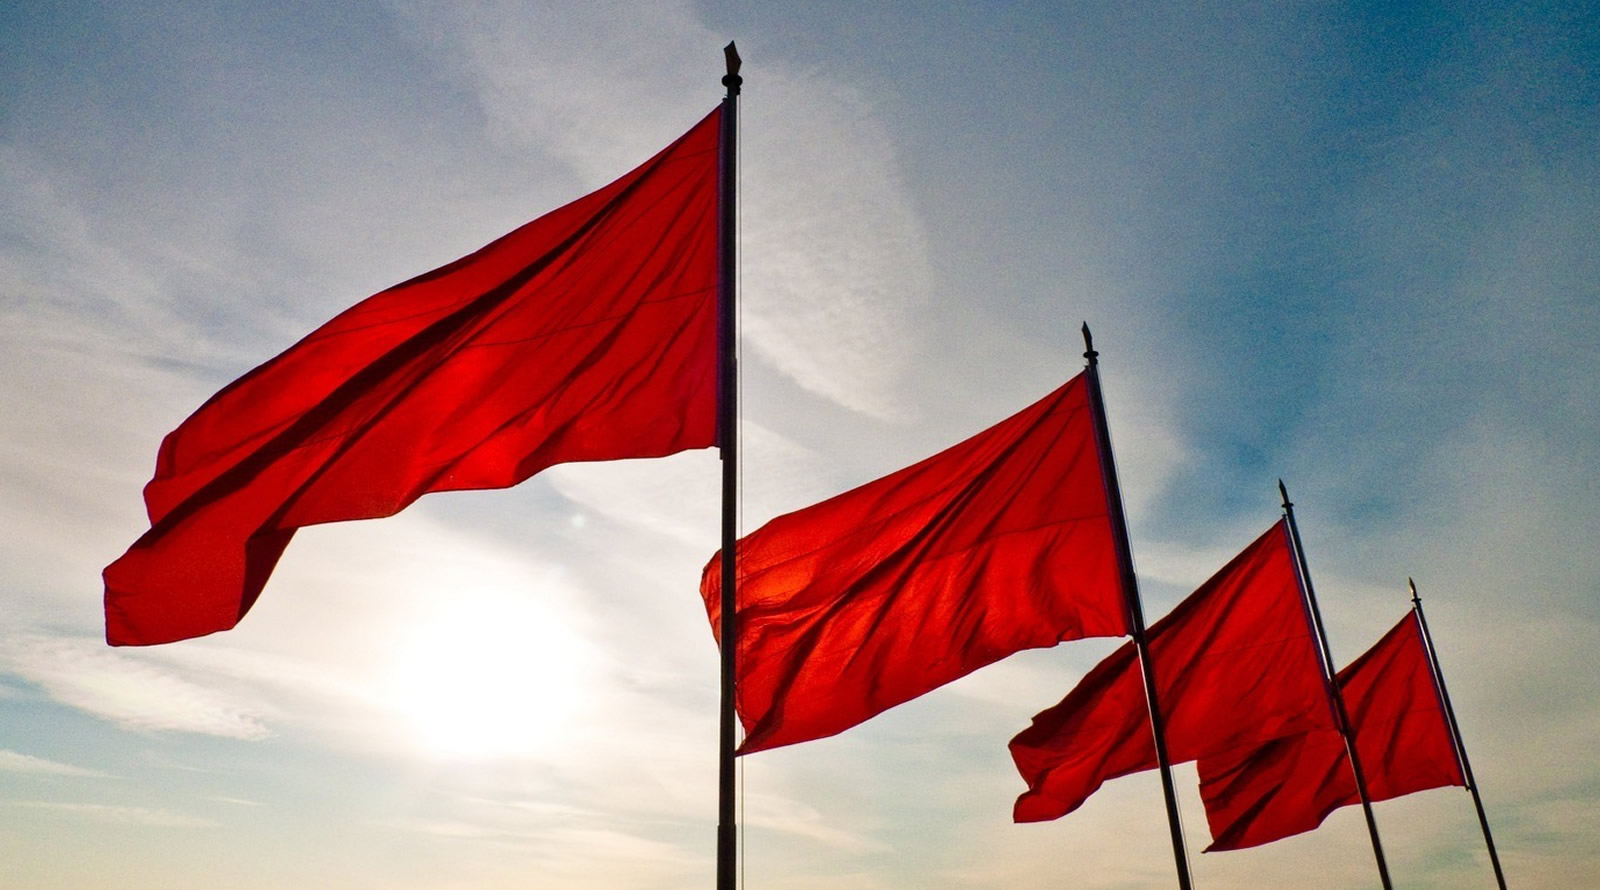 Cautionary Tale: Red Flags